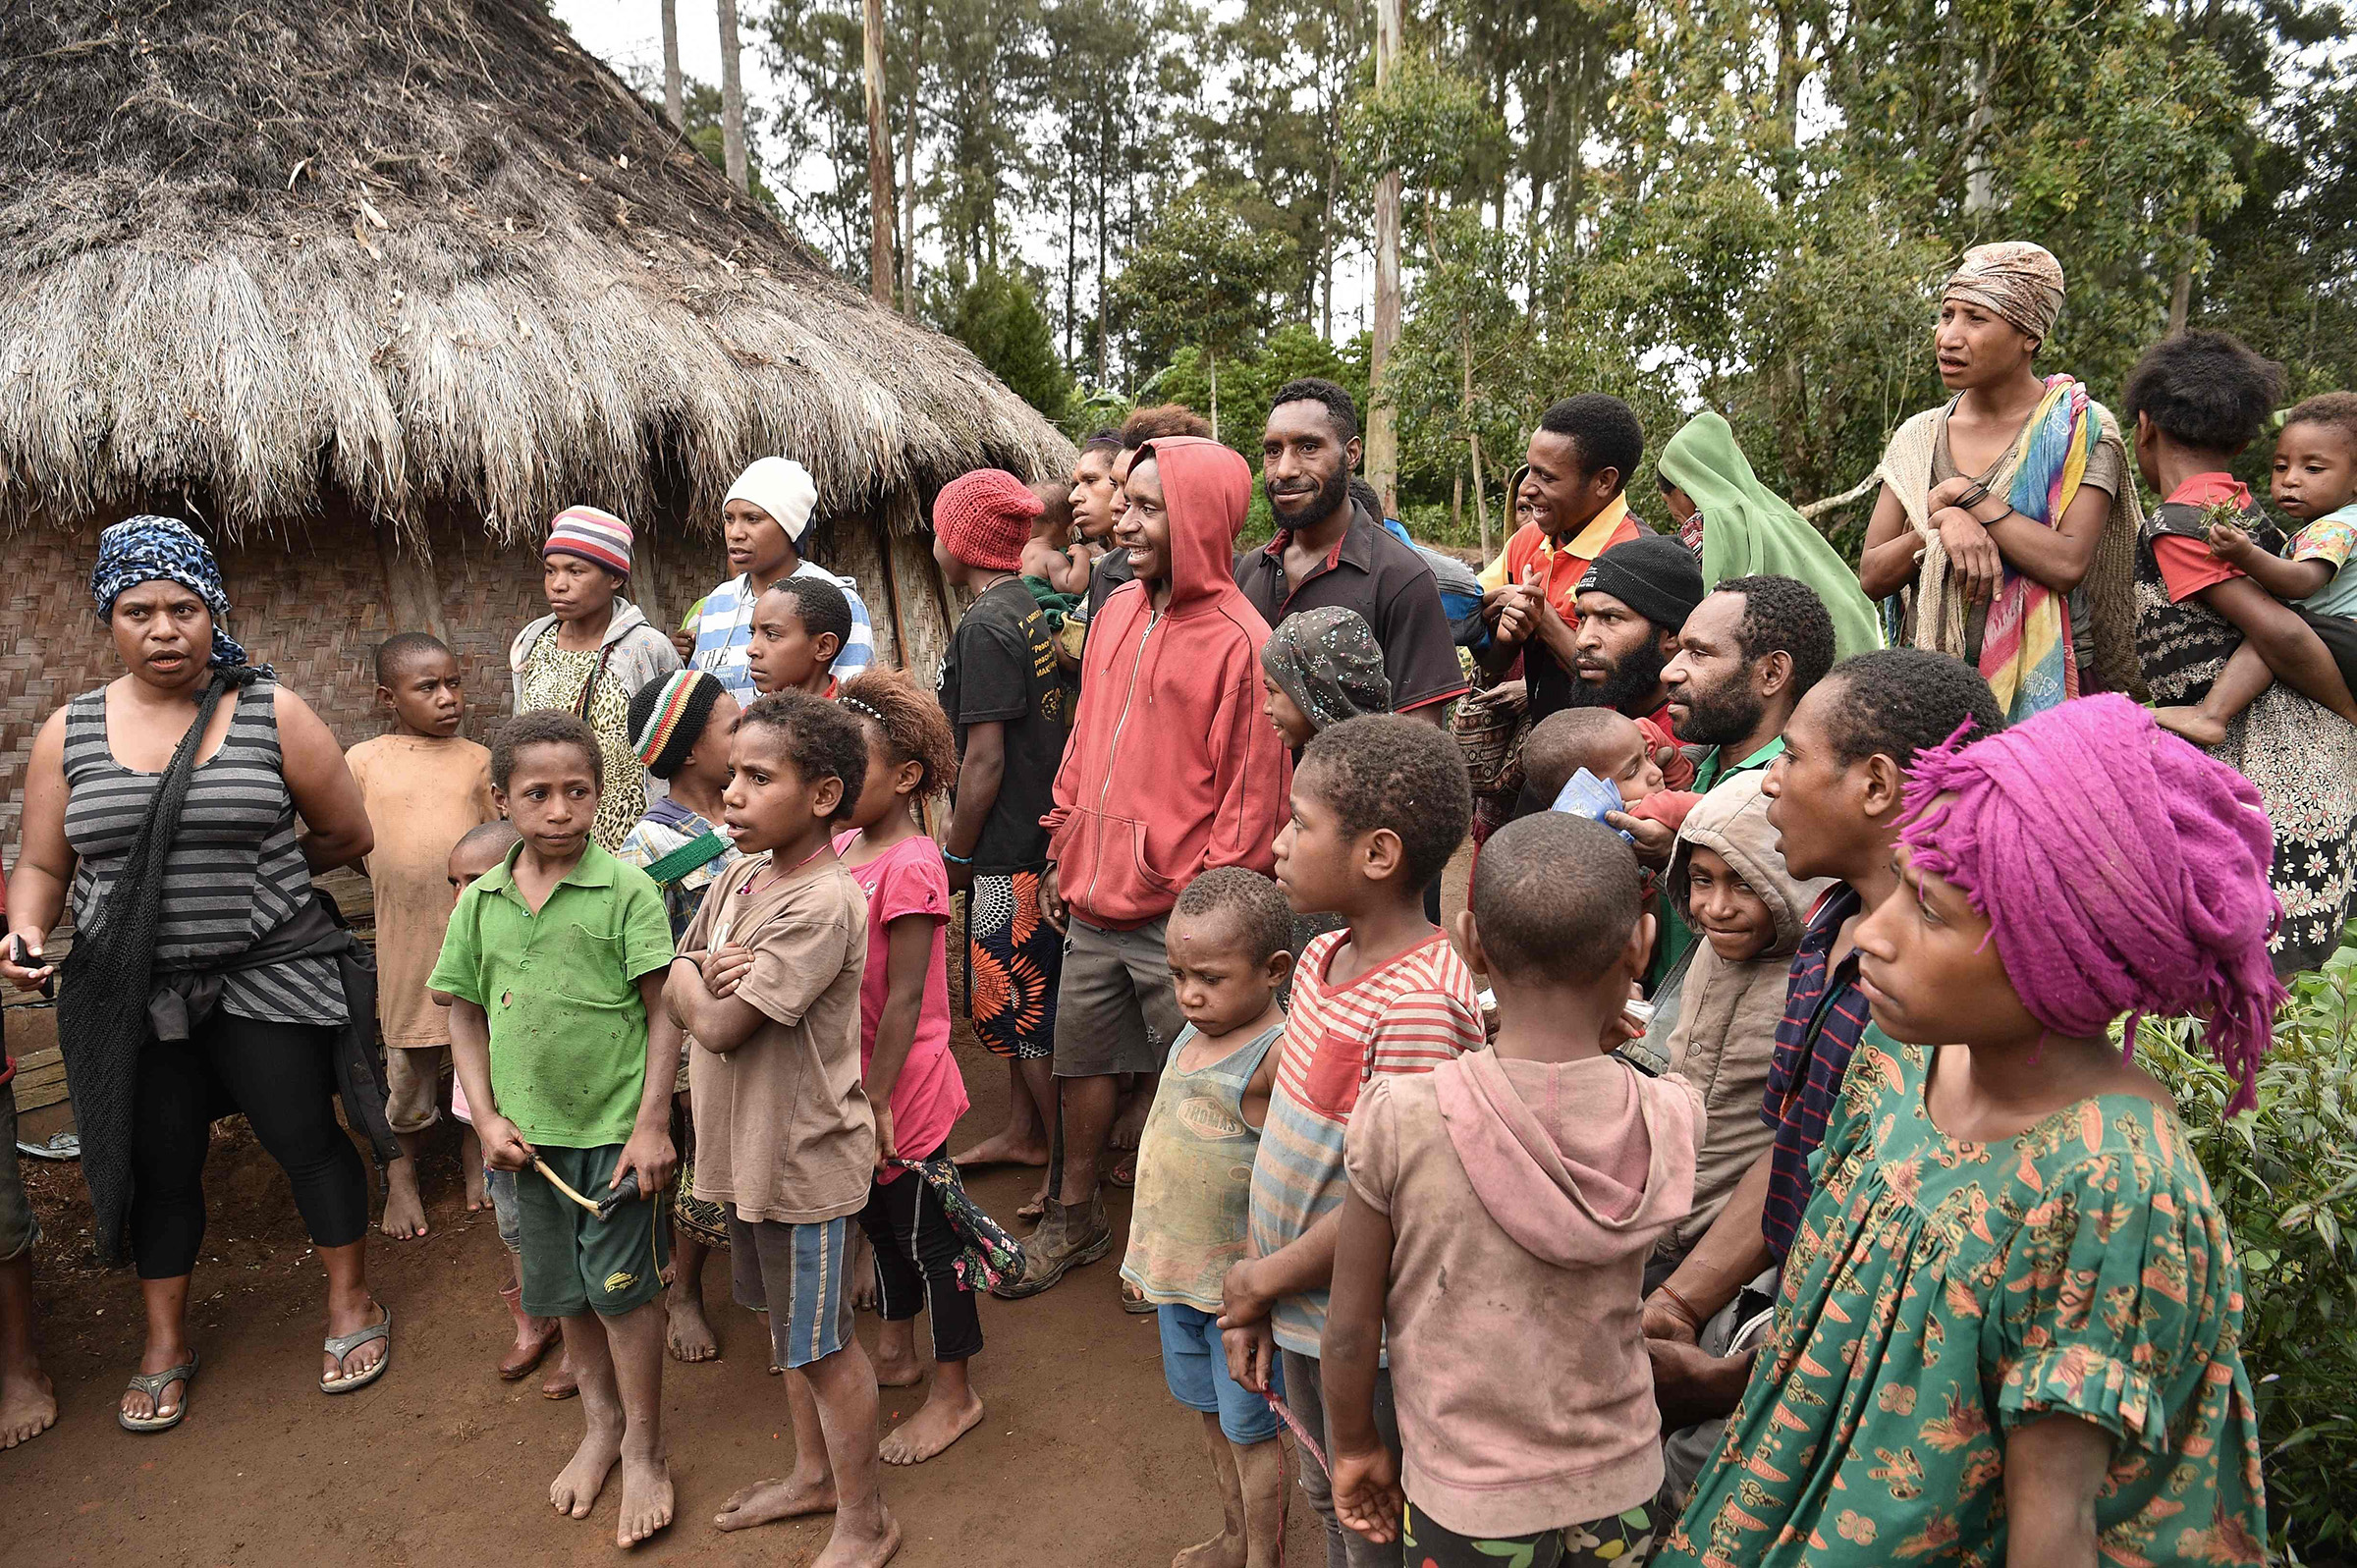 Neighbors gather near the home of 55-year-old mother-of-two Rachel in the Tsak Vally in the Highlands of Papua New Guinea after she recounts how in April 2017, she was accused of sorcery and tortured by people she knew, on November 20, 2018. (Peter Parks—AFP/Getty Images)